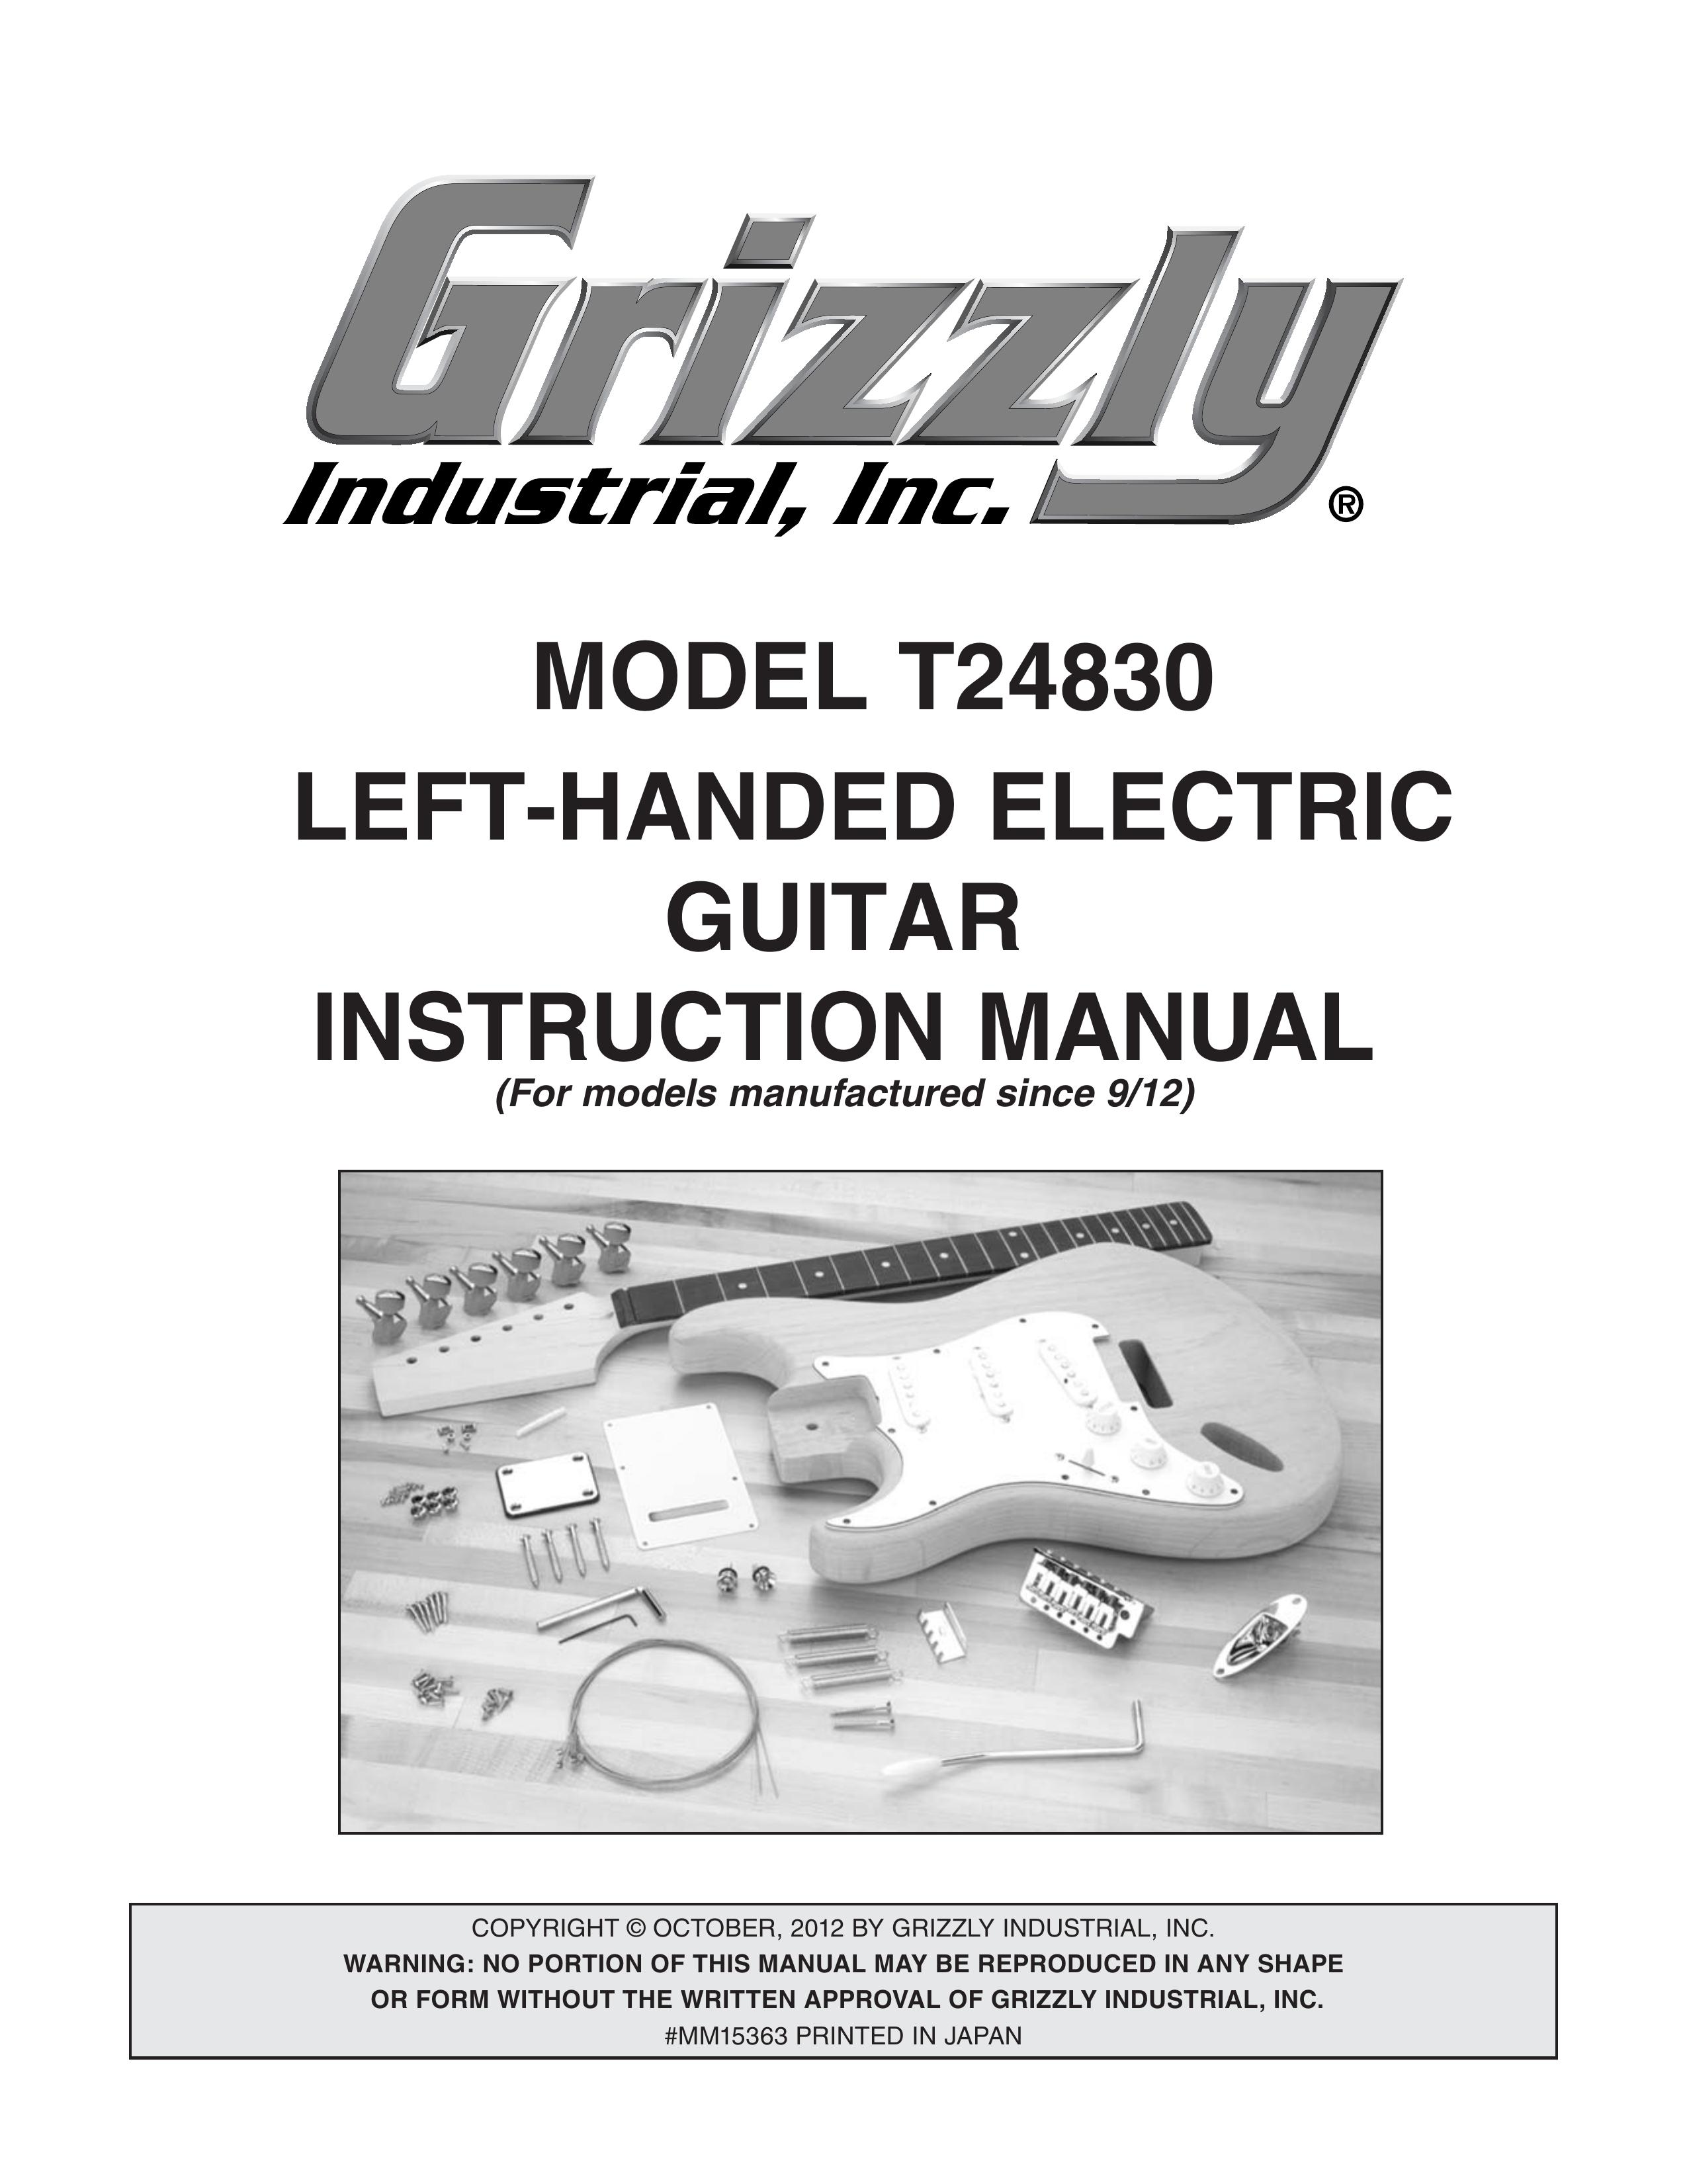 Grizzly T24830 Guitar User Manual